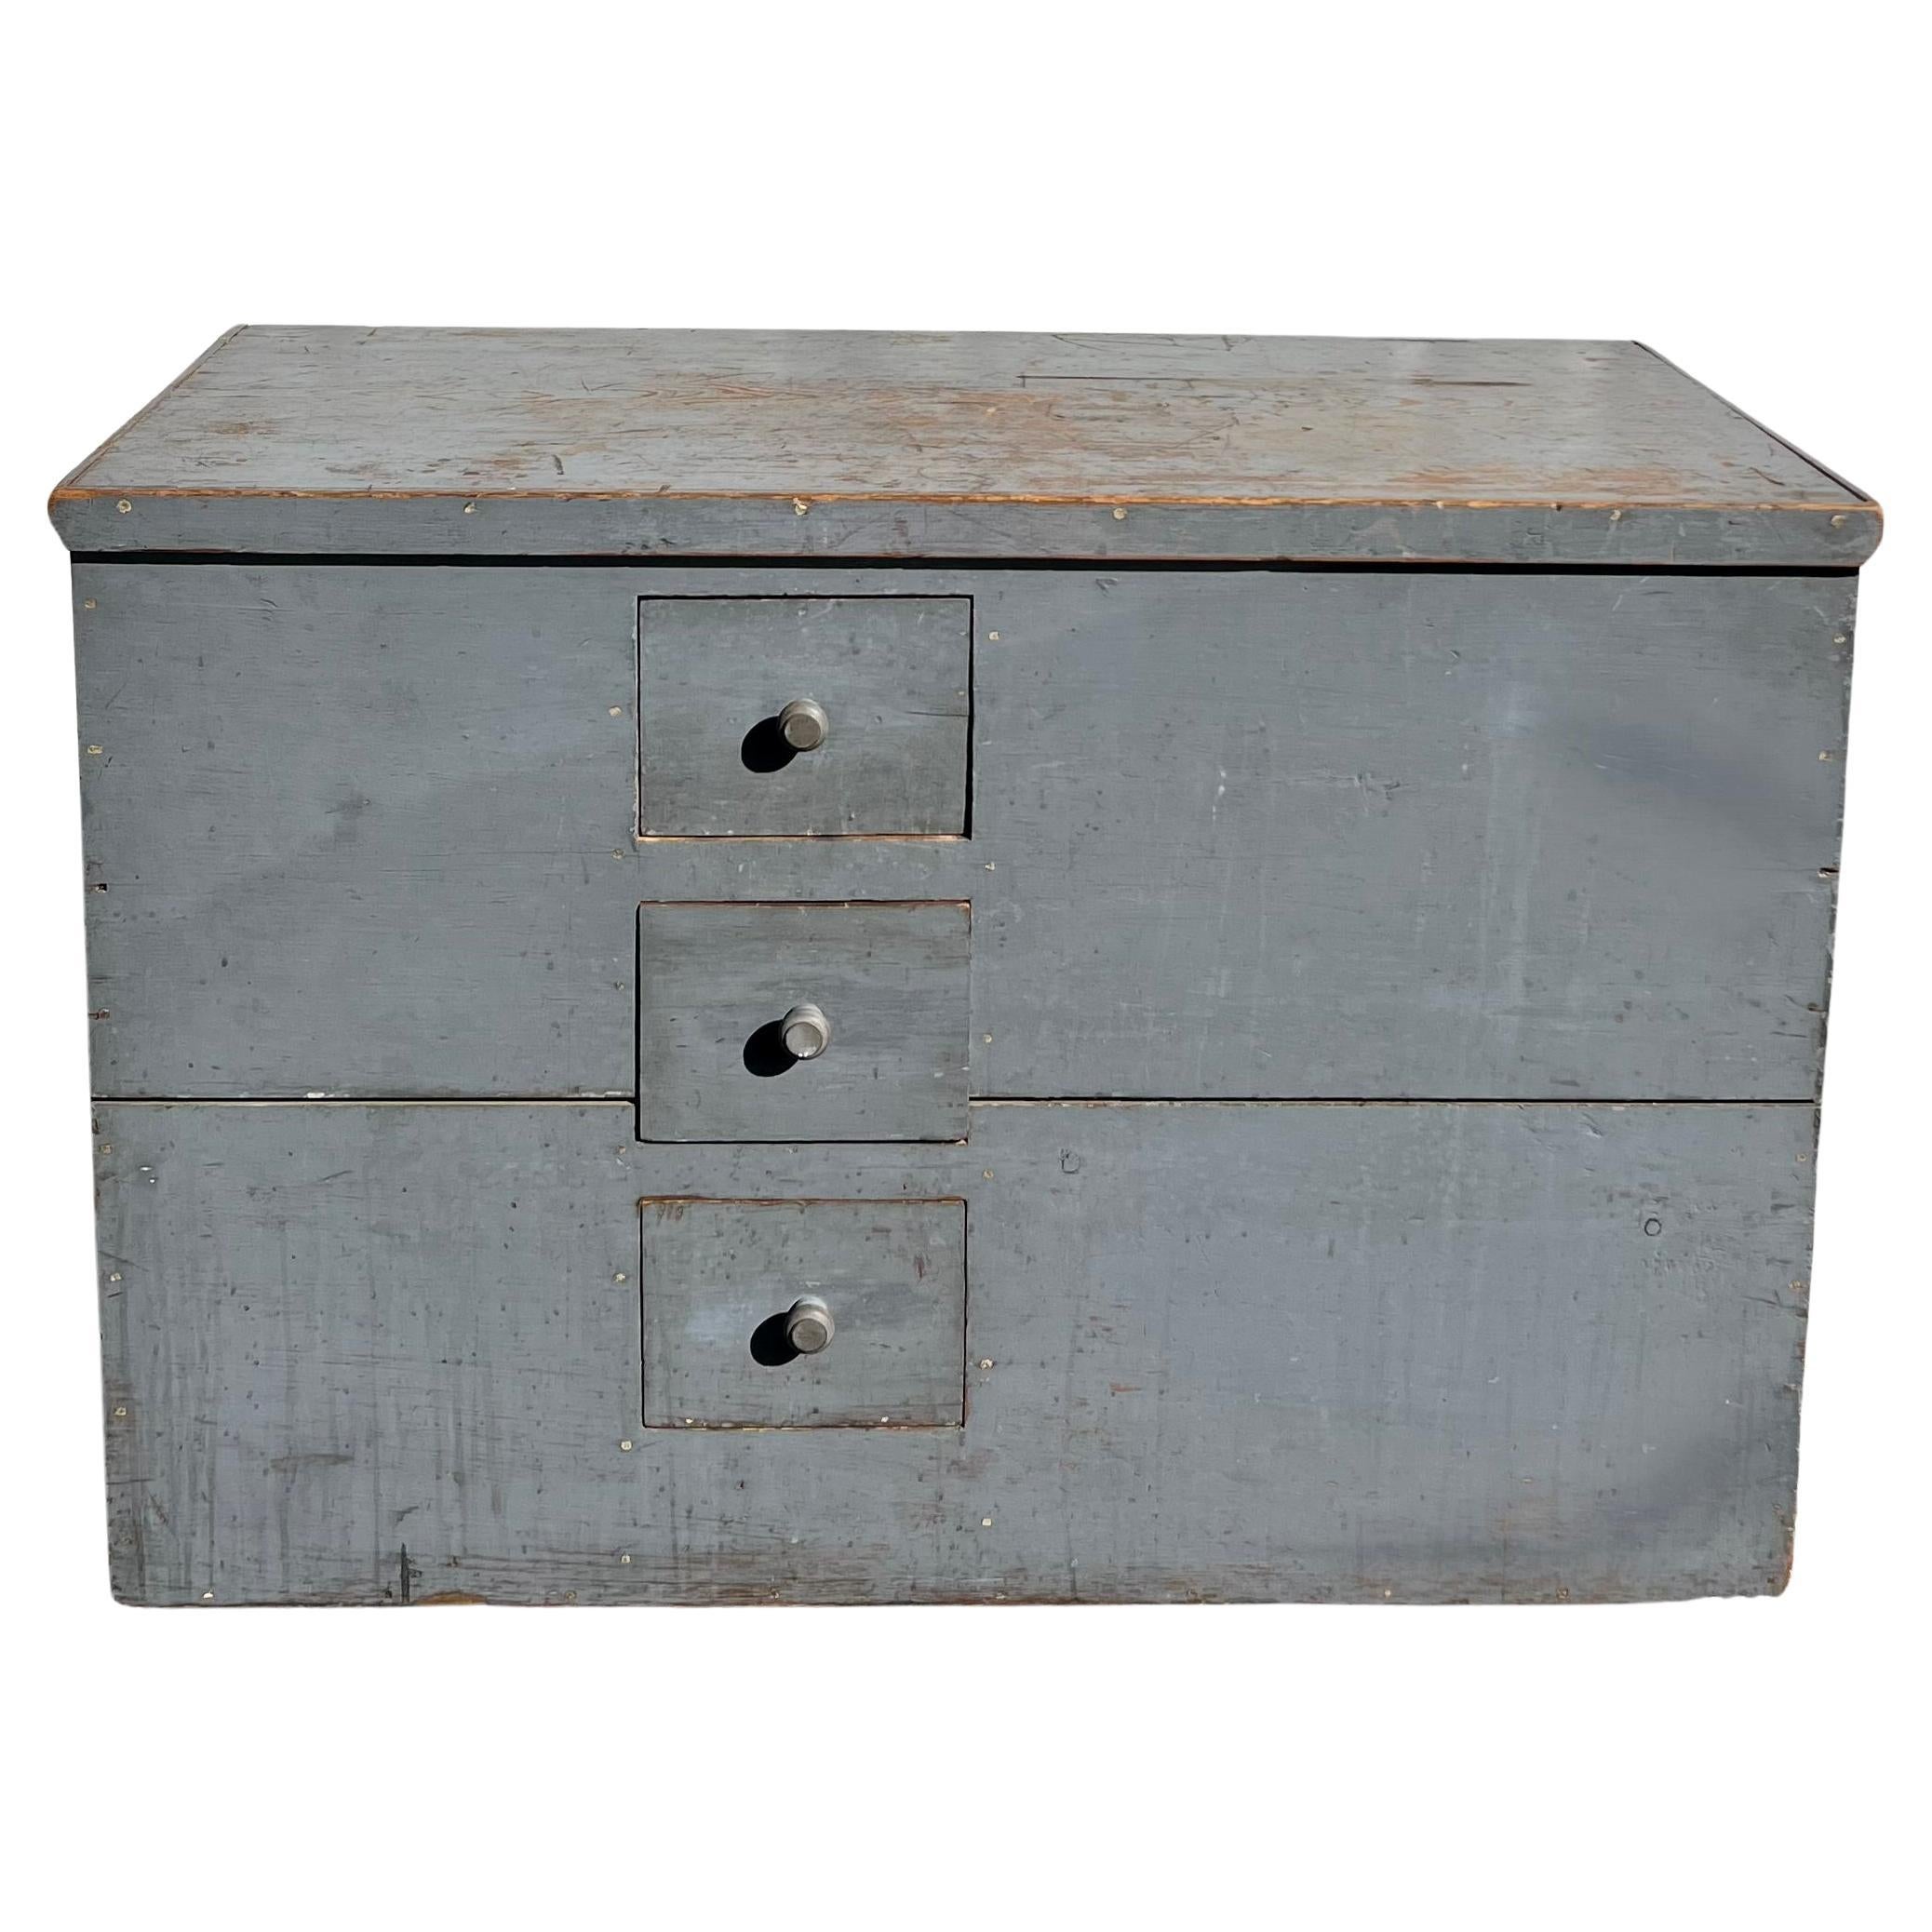 Mid-19th Century Gray Blue Painted Grain Storage Bin With 3 Drawers